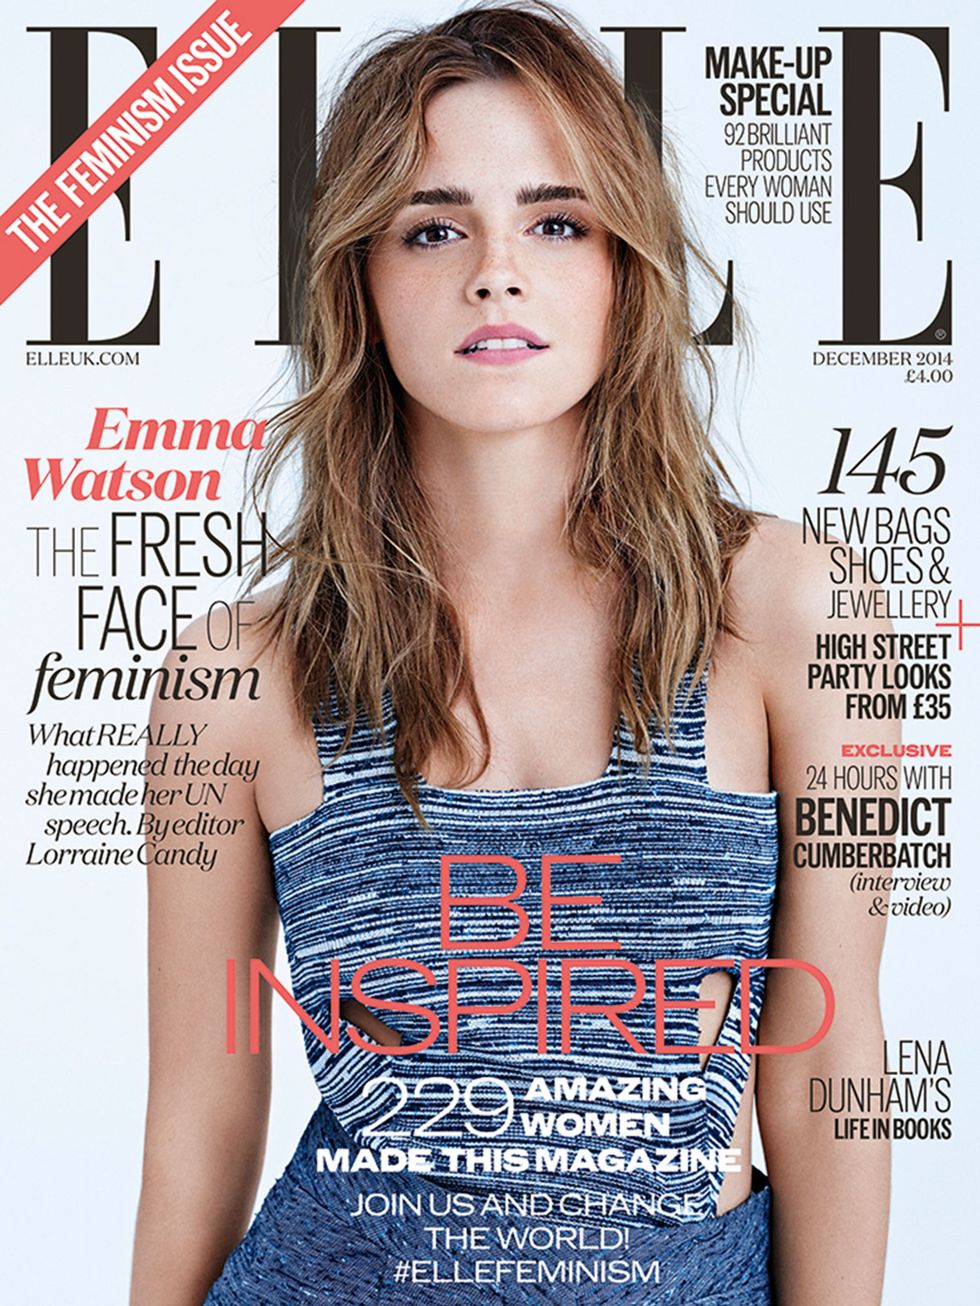 <p>The make-up and hair essentials you need to recreate Emma Watson's cover look...</p>